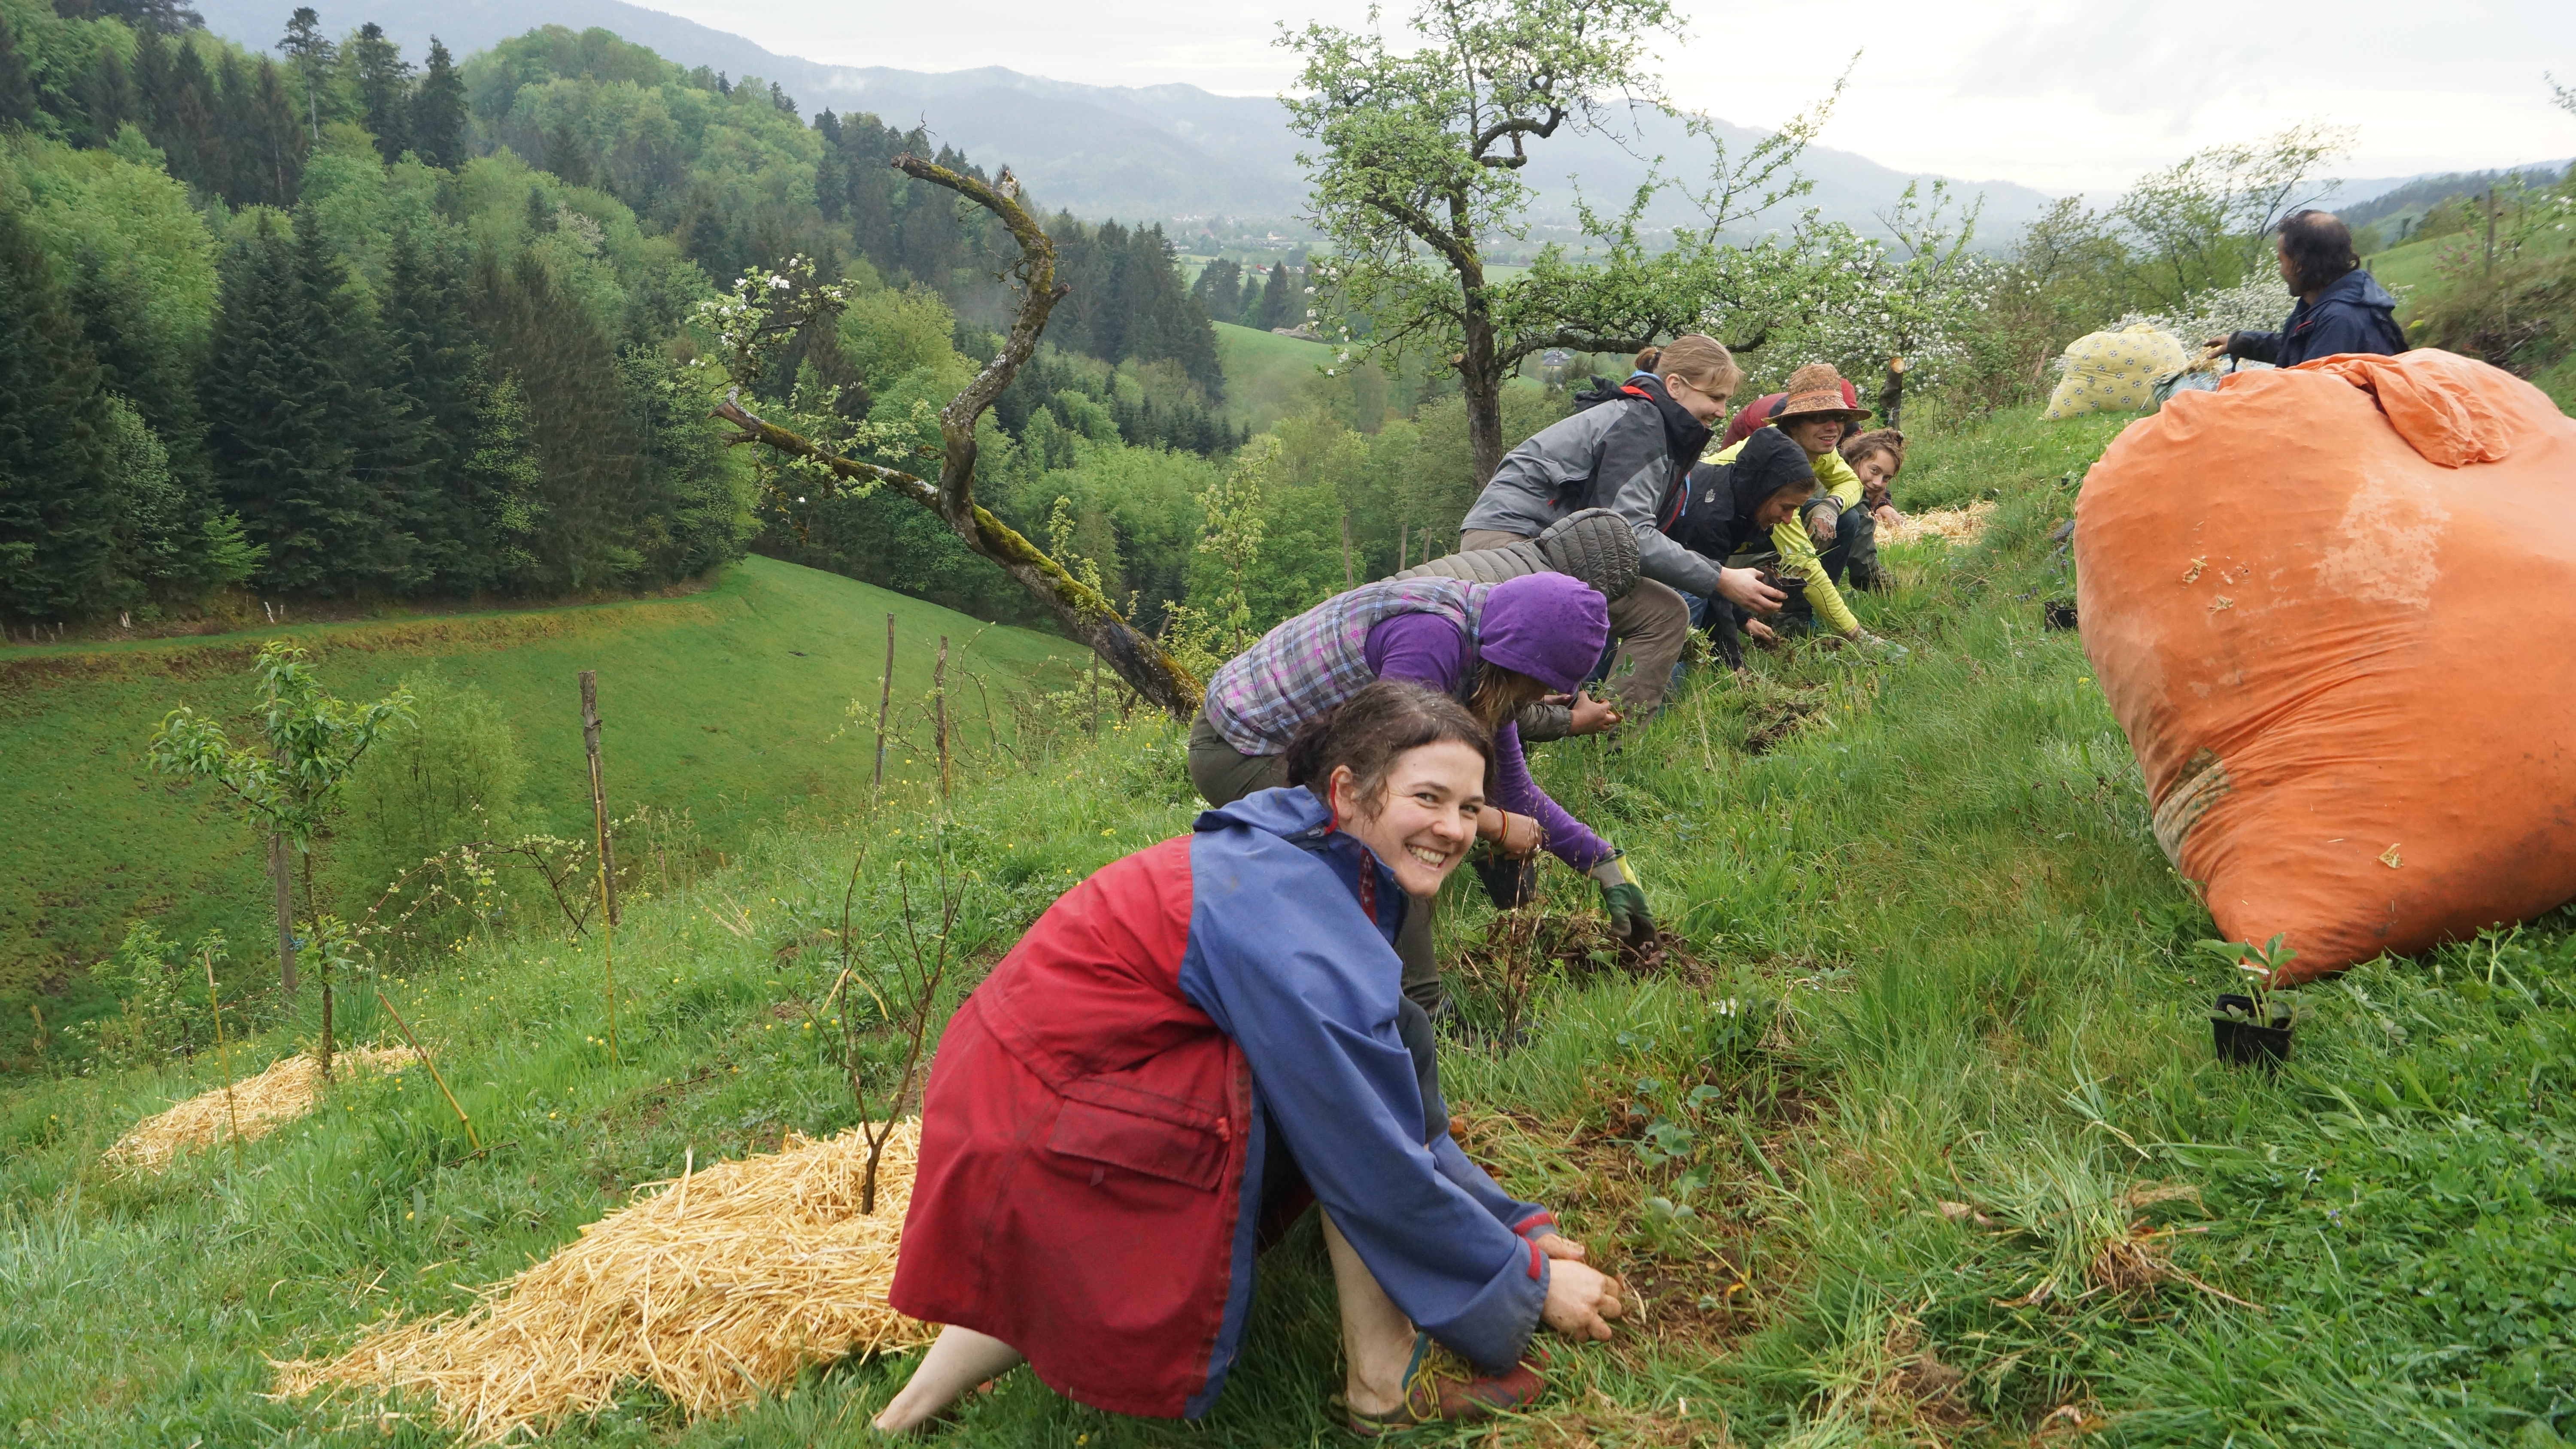 Planting of strawberries and protection by mulching during the Werkeltagen.